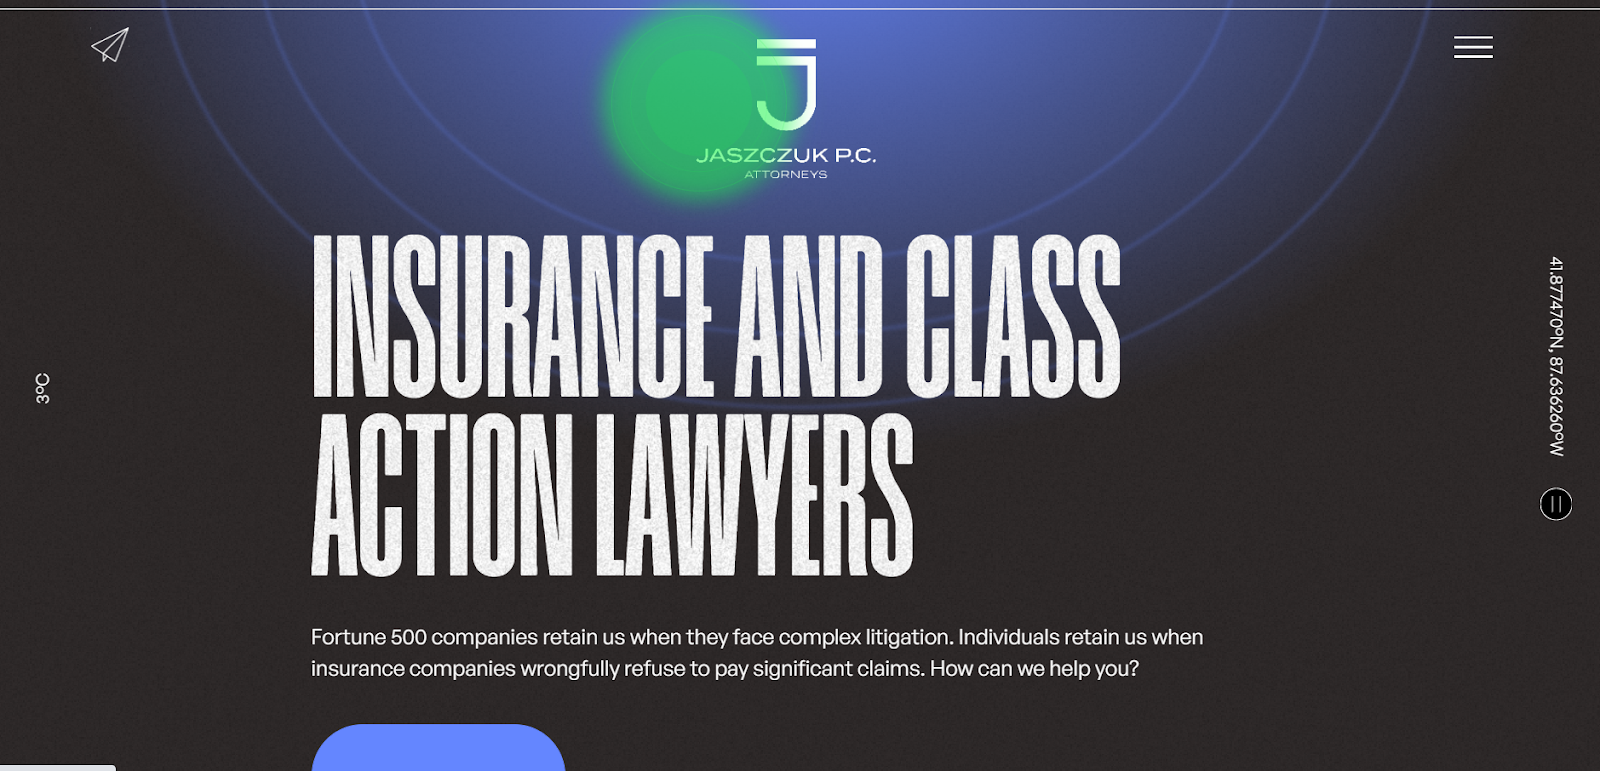 A class action lawyer's website